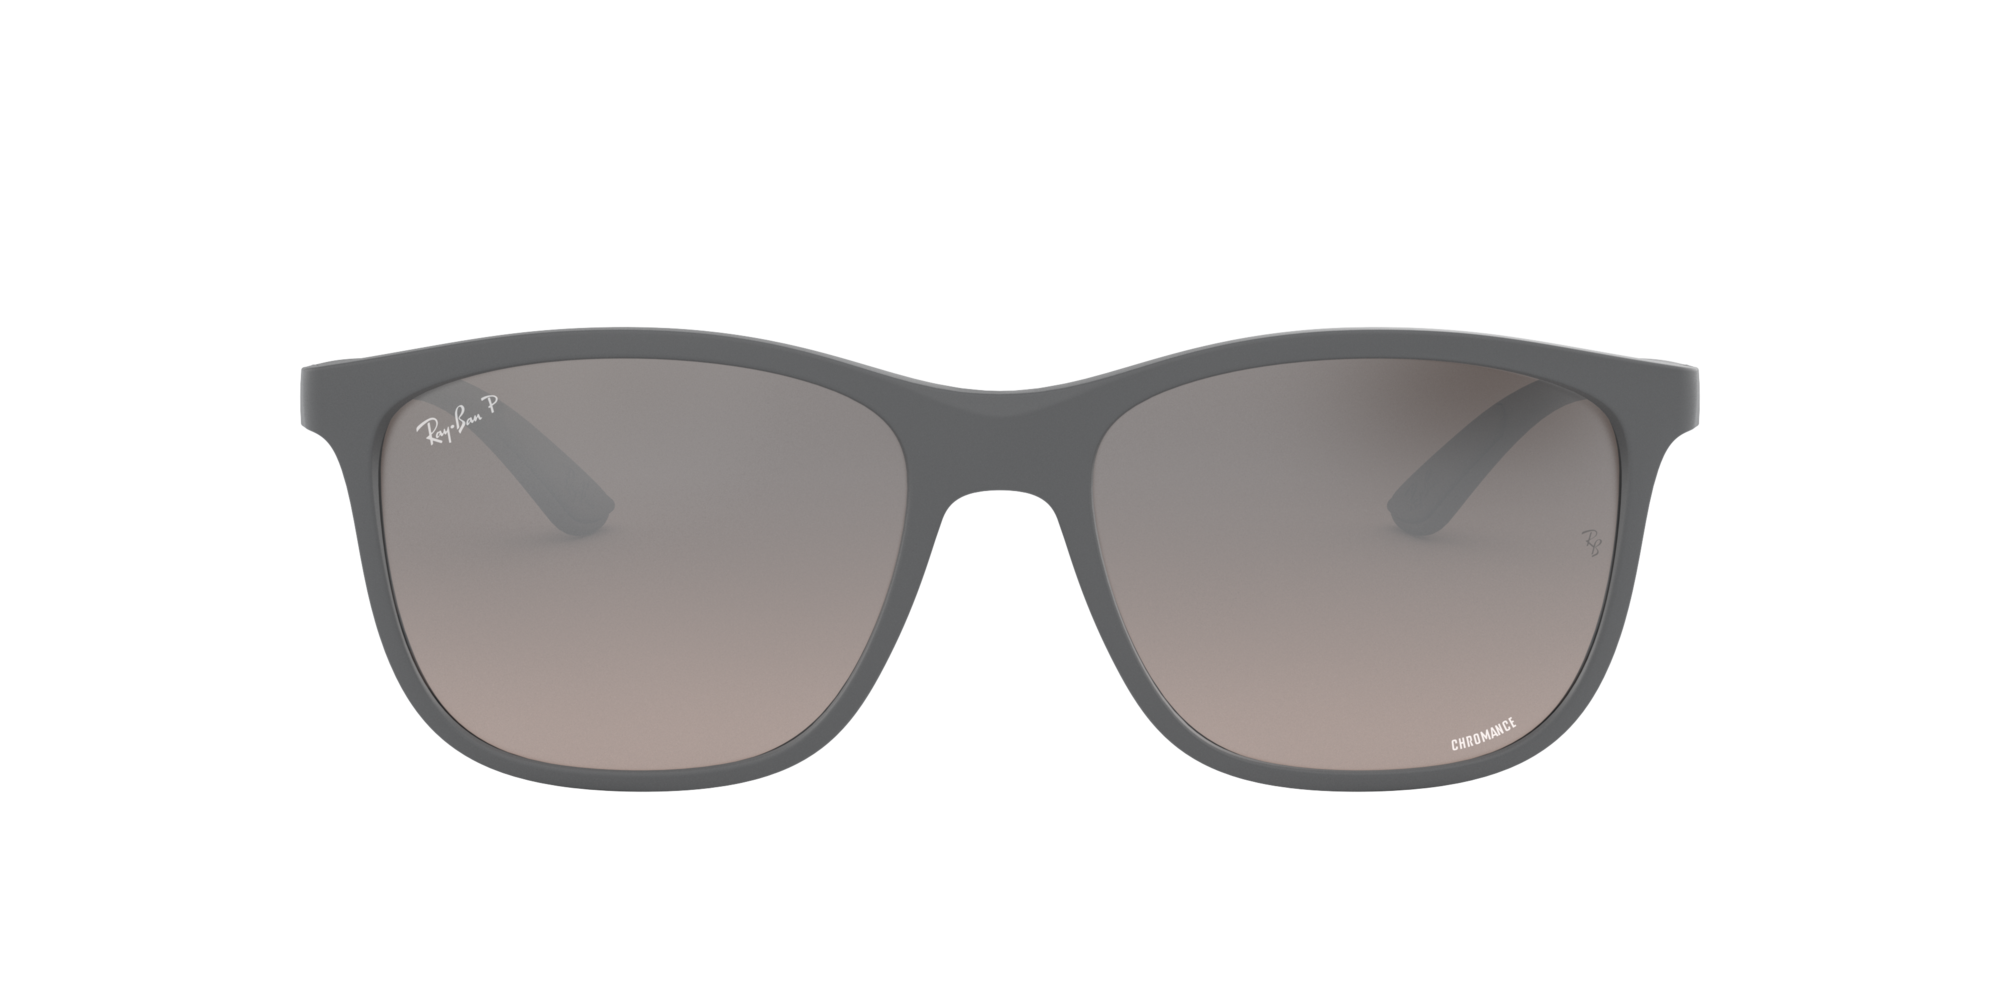 Ray Ban Rb4330ch 56 Chromance Sunglasses Lenscrafters